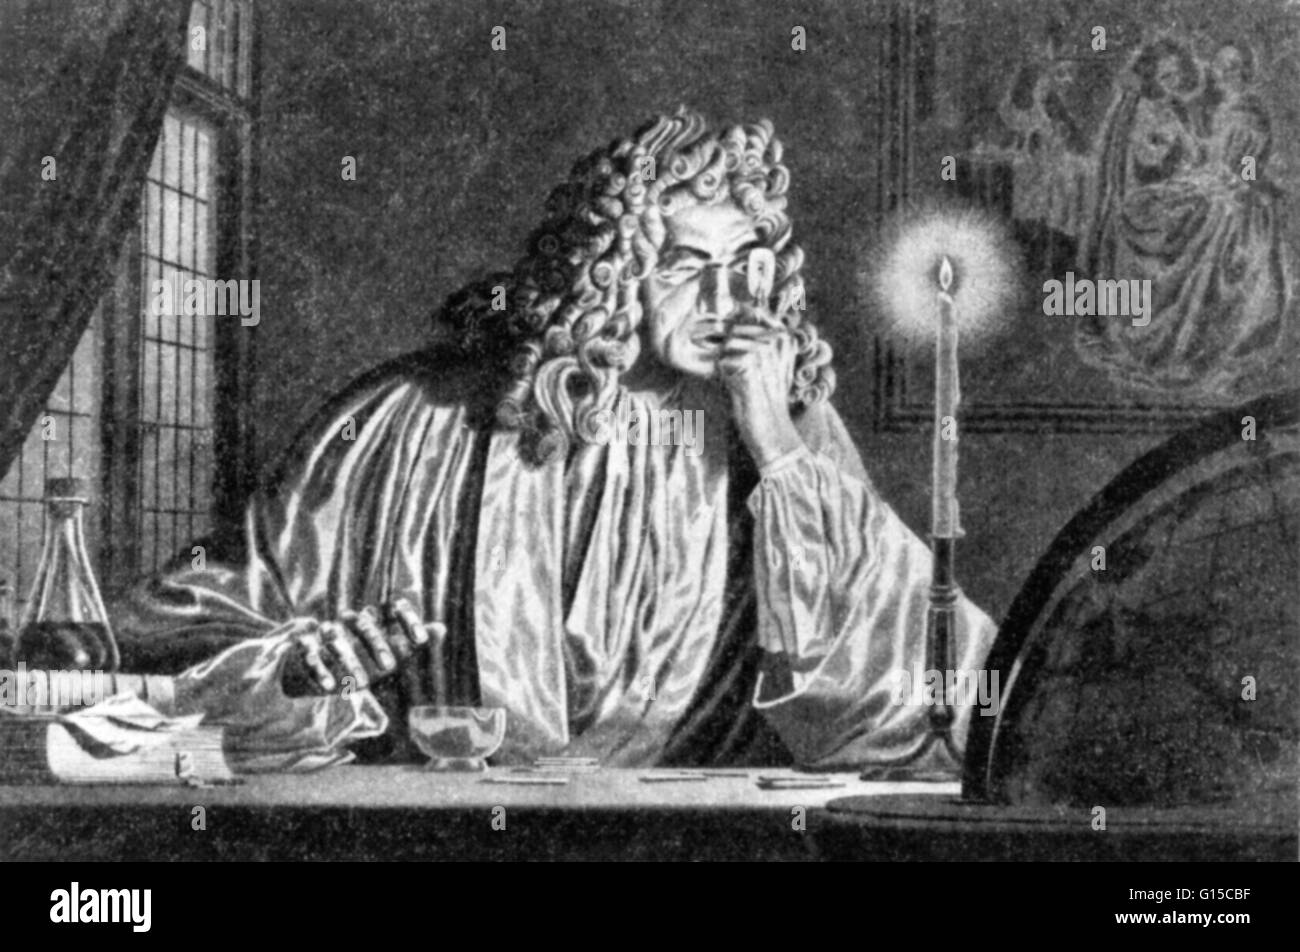 Antonie Philips van Leeuwenhoek (1632-1723) was a Dutch tradesman and  scientist. He is known as "the Father of Microbiology", and considered to  be the first microbiologist. He is best known for his